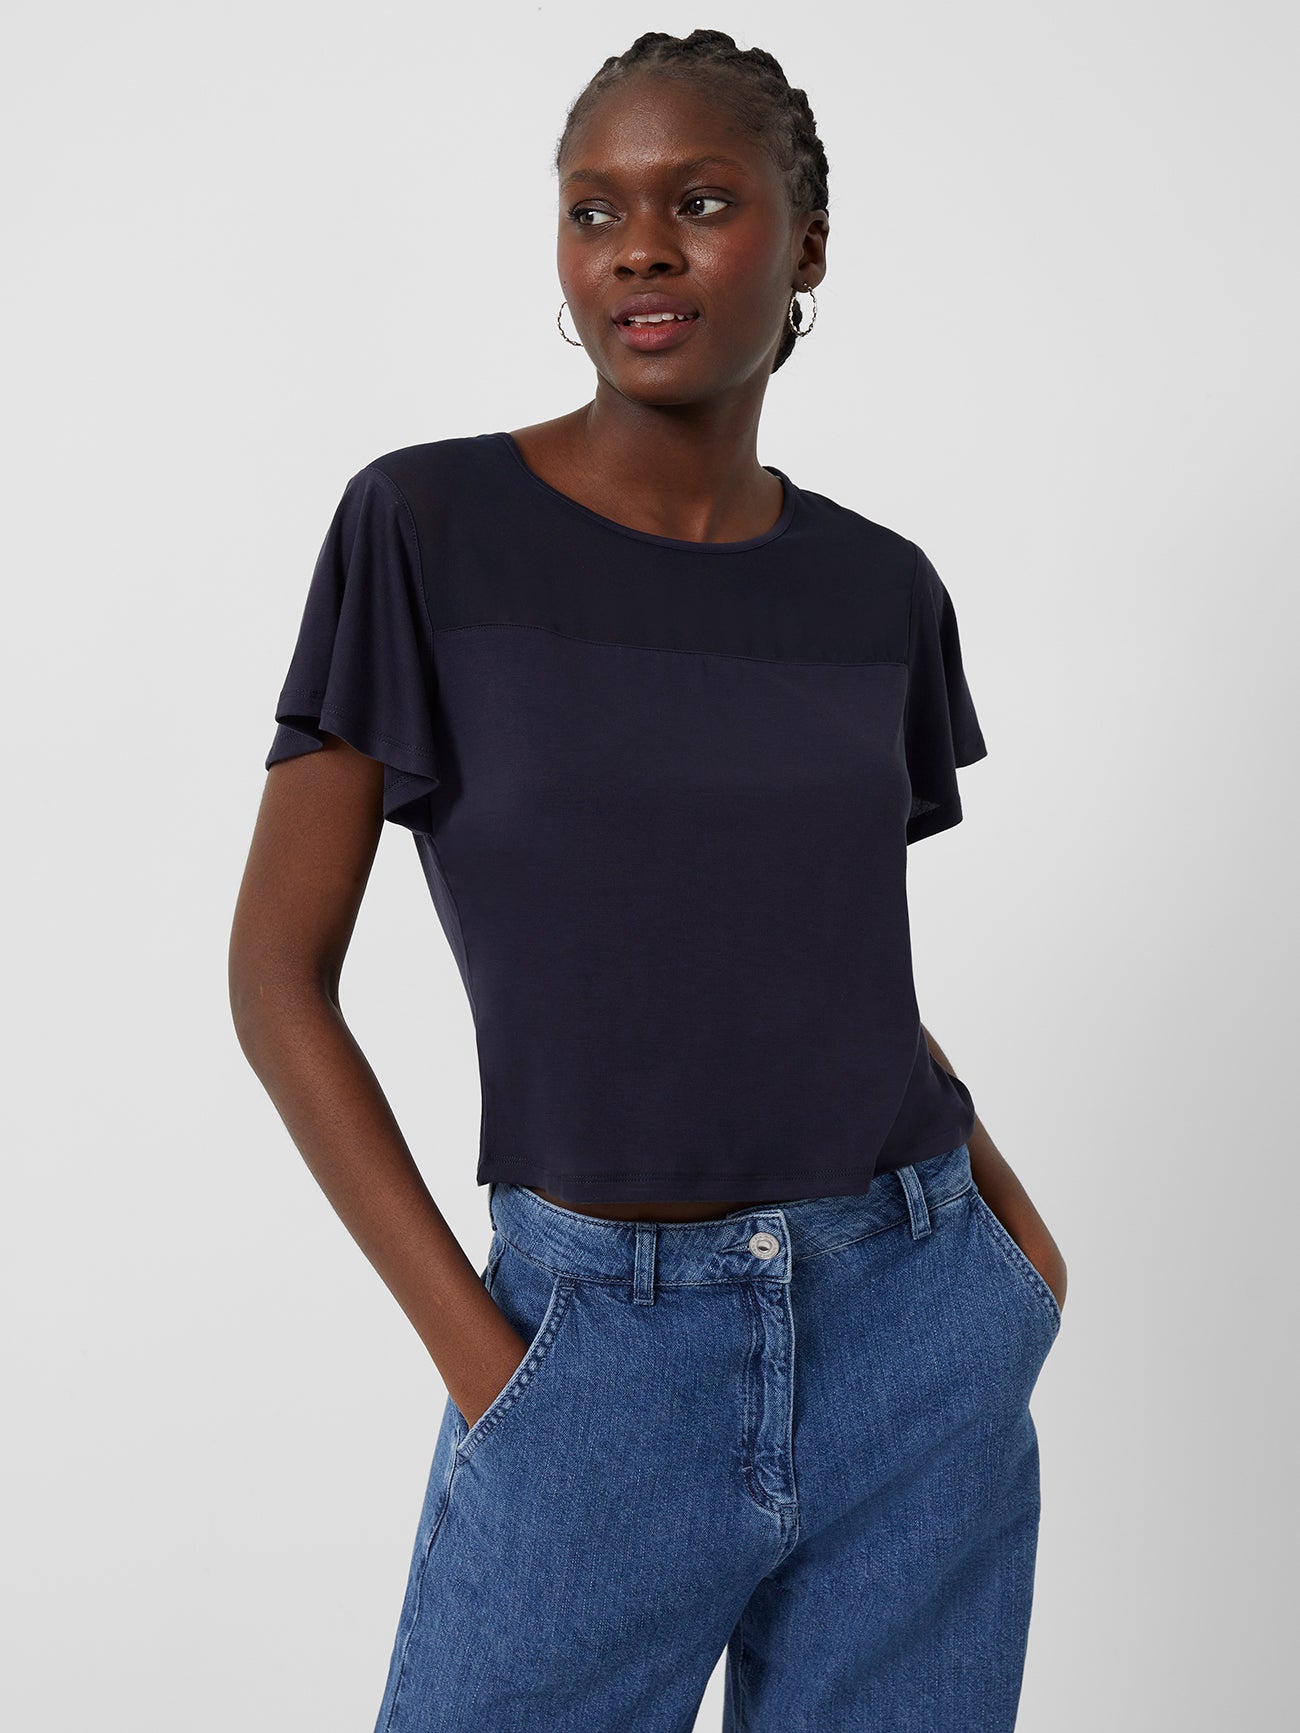 French Connection - Rezi Jersey Top | French Connection |  Shirts & Tops | Extra Small - Blue - Size: XS